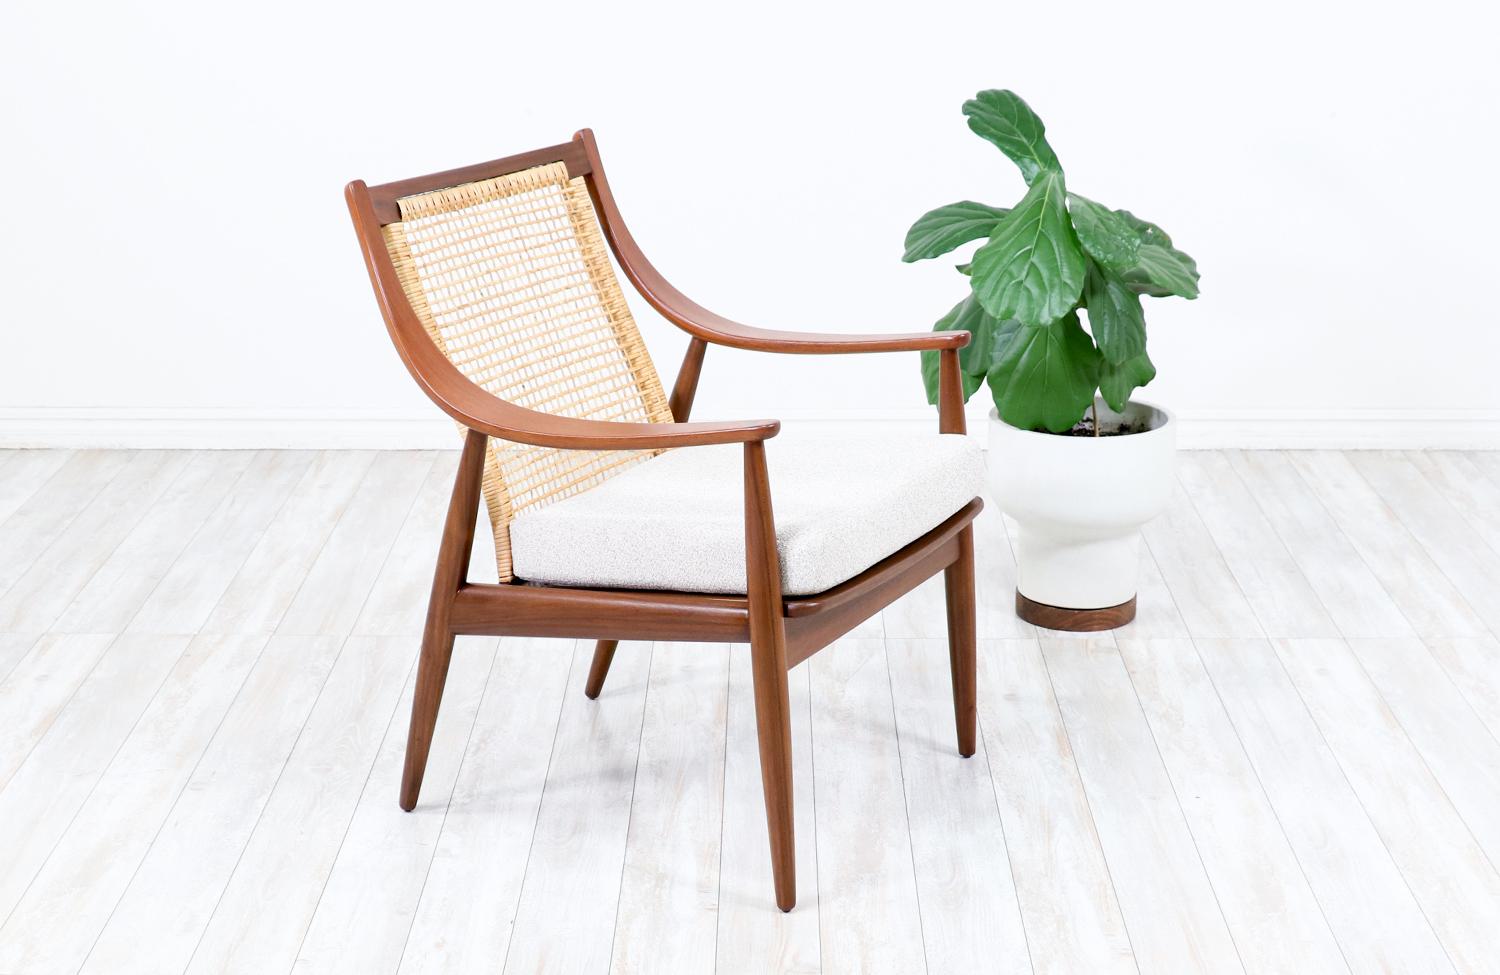 Pair of lounge chairs designed by Peter Hvidt & Orla Mølgaard-Nielsen for France & Daverkosen in Denmark circa 1950’s. This spectacular pair of model FD-146 chairs feature a teak wood frame with a recently upholstered seat cushion in a quality soft